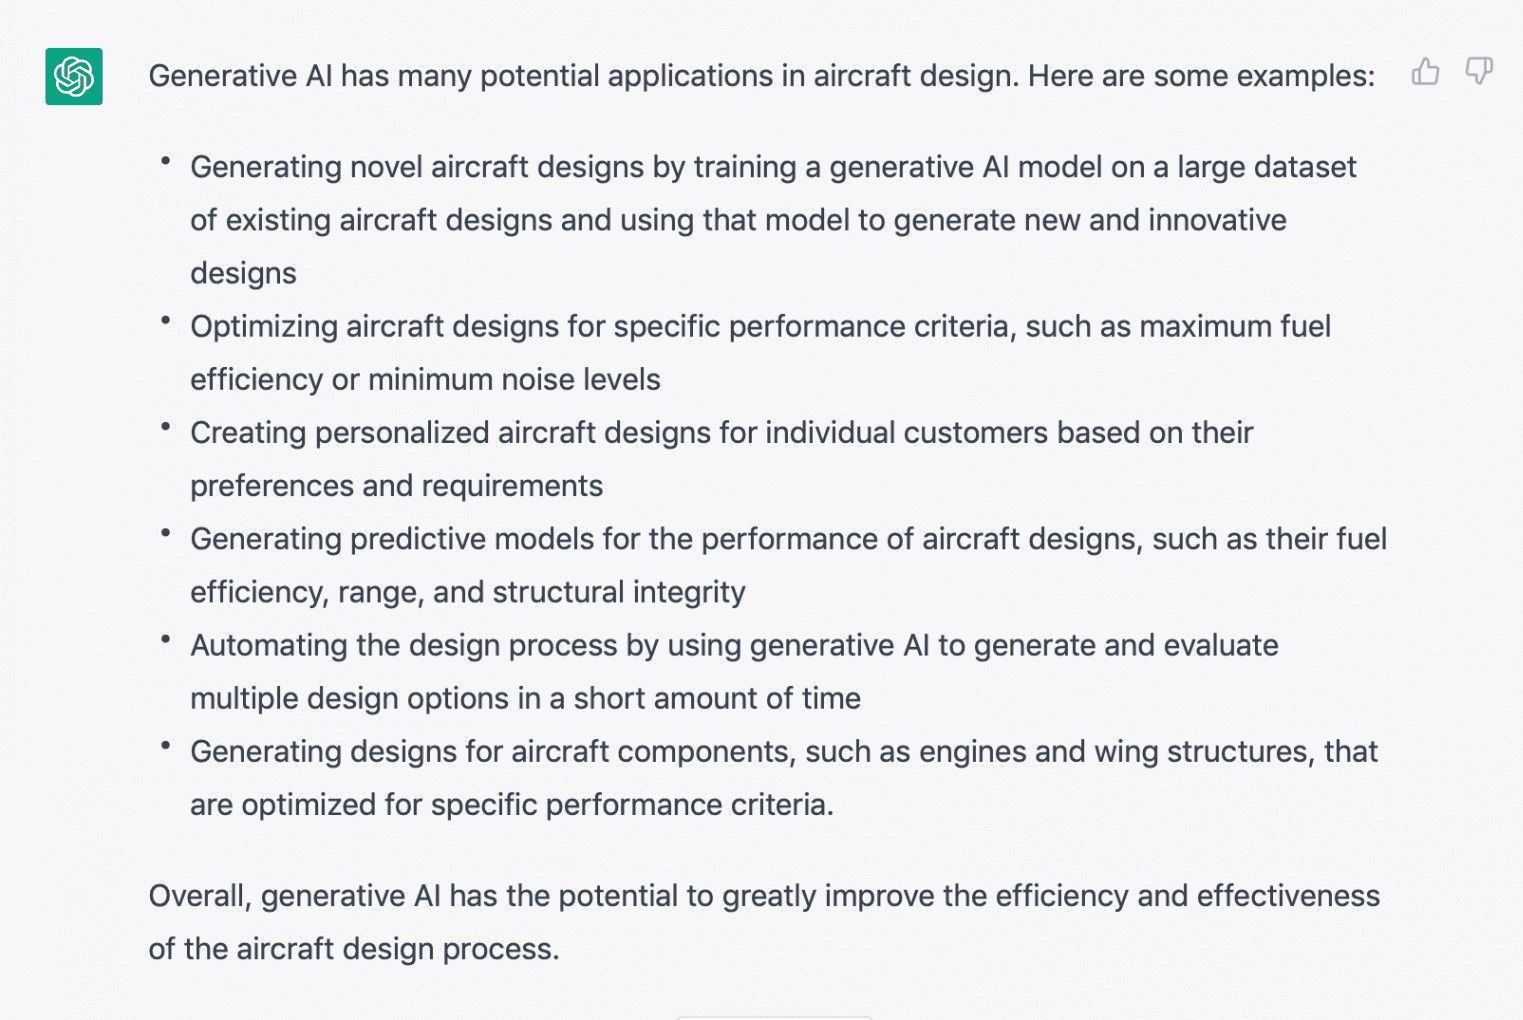 What are the applications of Generative AI in aircraft design?